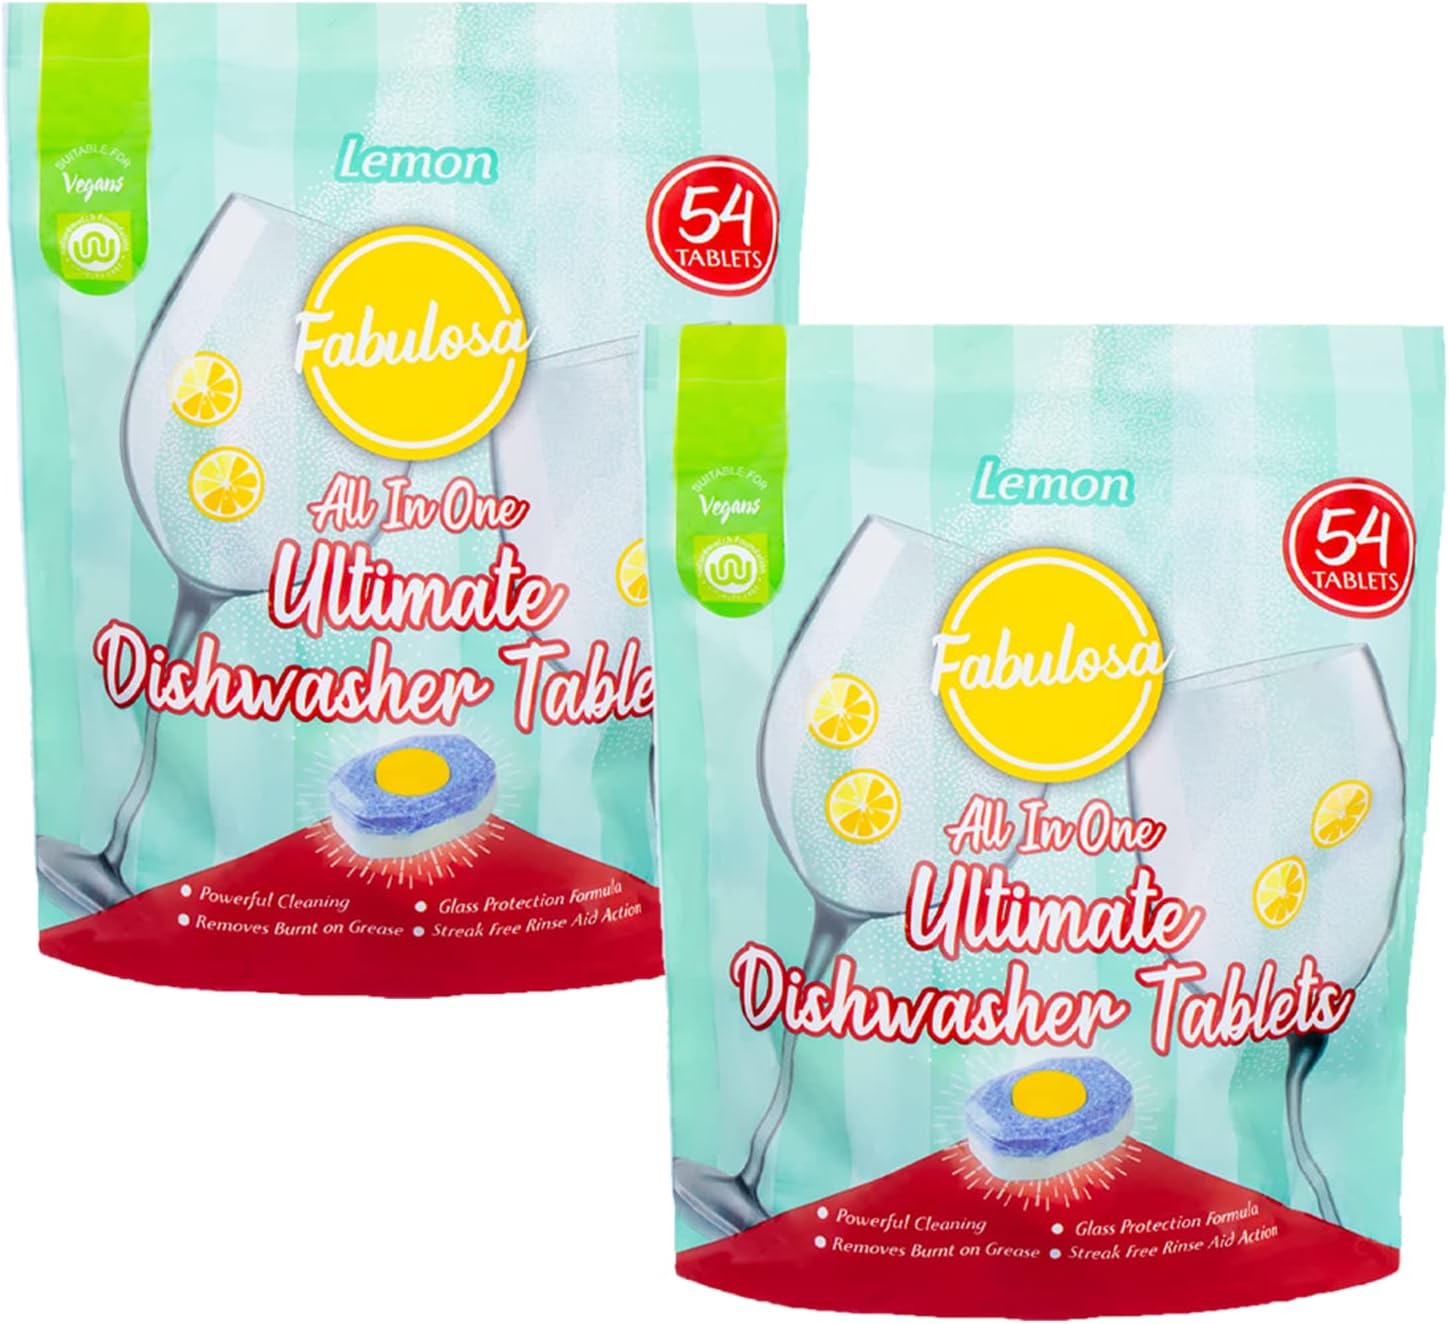 Fabulosa All in One Ultimate Powerful Cleaning Rinse Aid Dishwasher Tablets Cleaner and Freshener, 108 Tablets, 2 Pack, LEMON - 1132